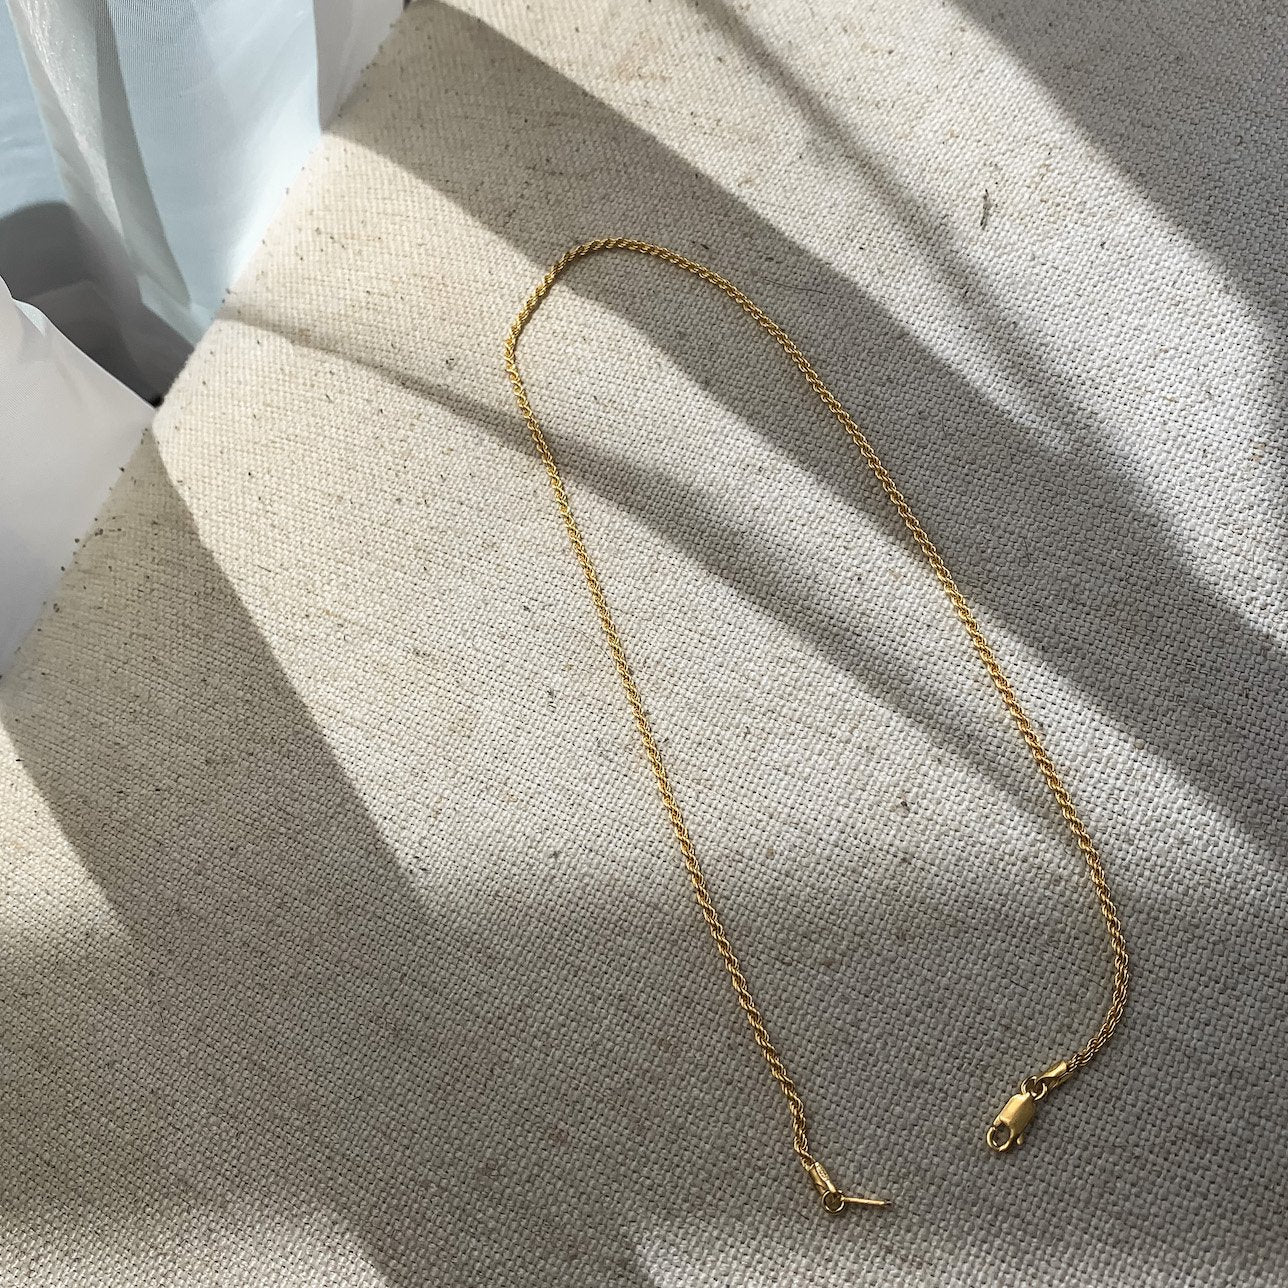 14k gold necklace solid rope chain lay flat style photo kemmi collection